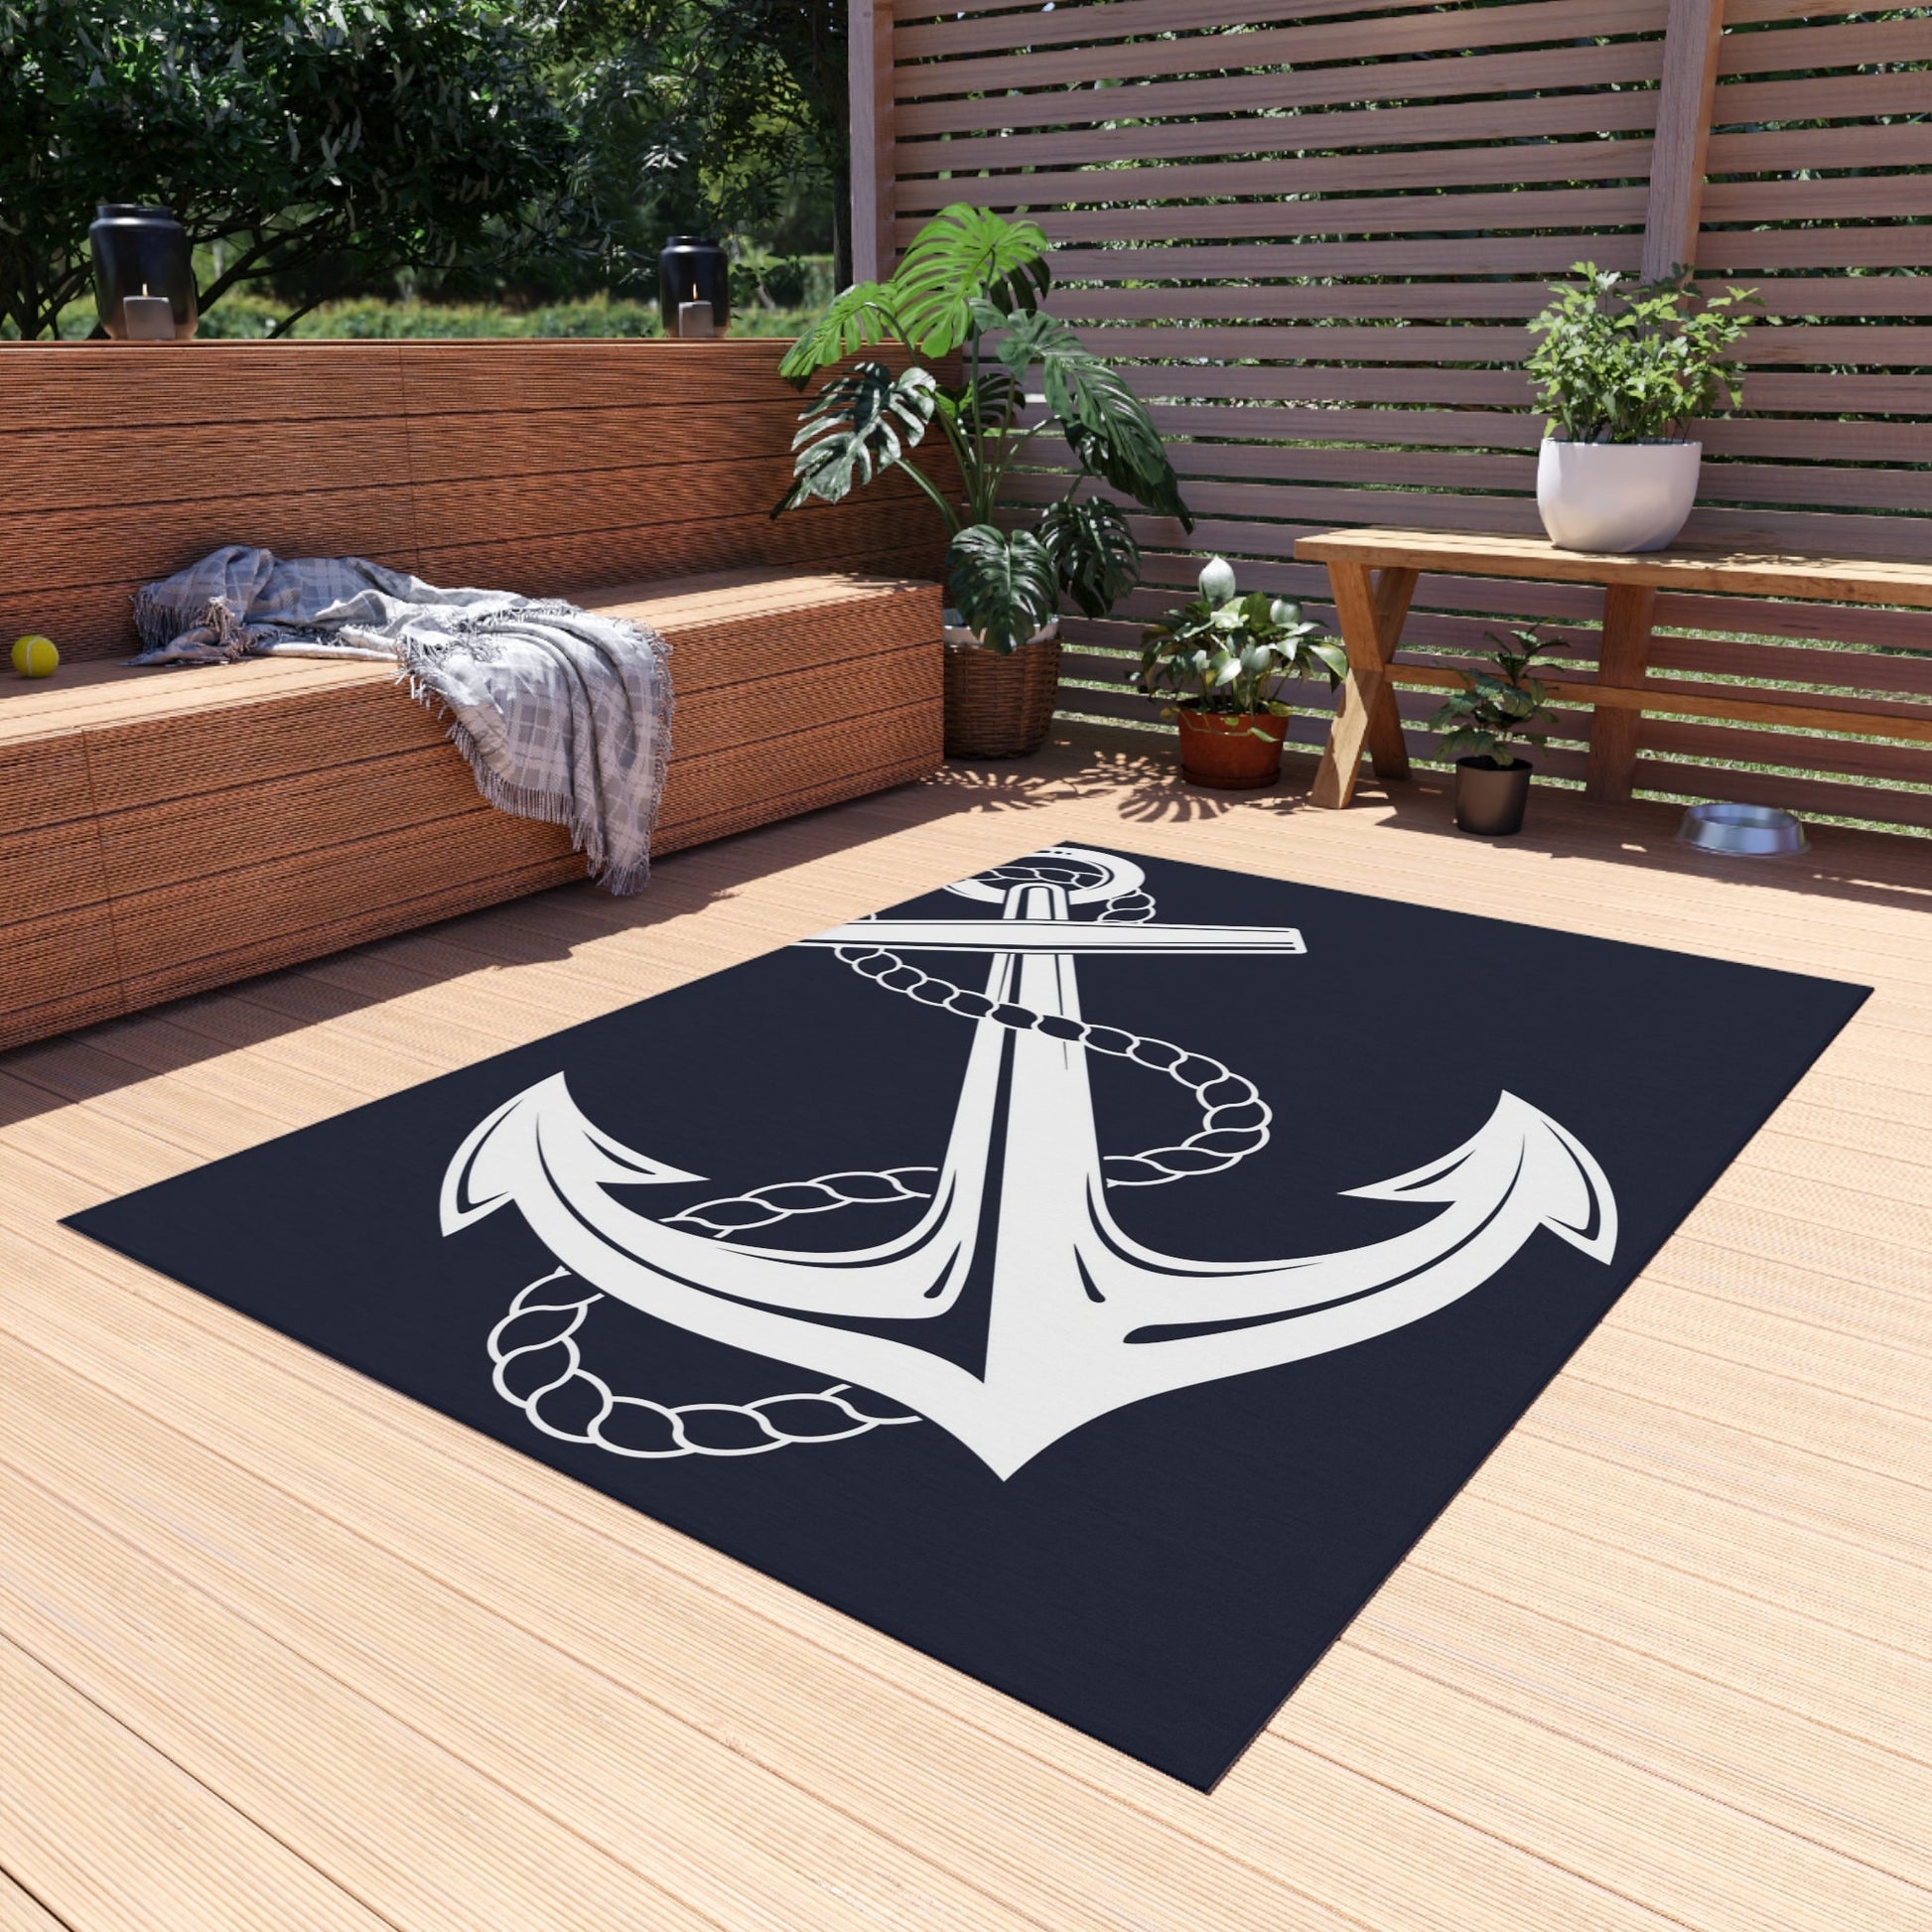 Anchor Outdoor Rug Nautical Patio Rugs navy white Porch rugs 2x3 5x7 large 8x10 9x12